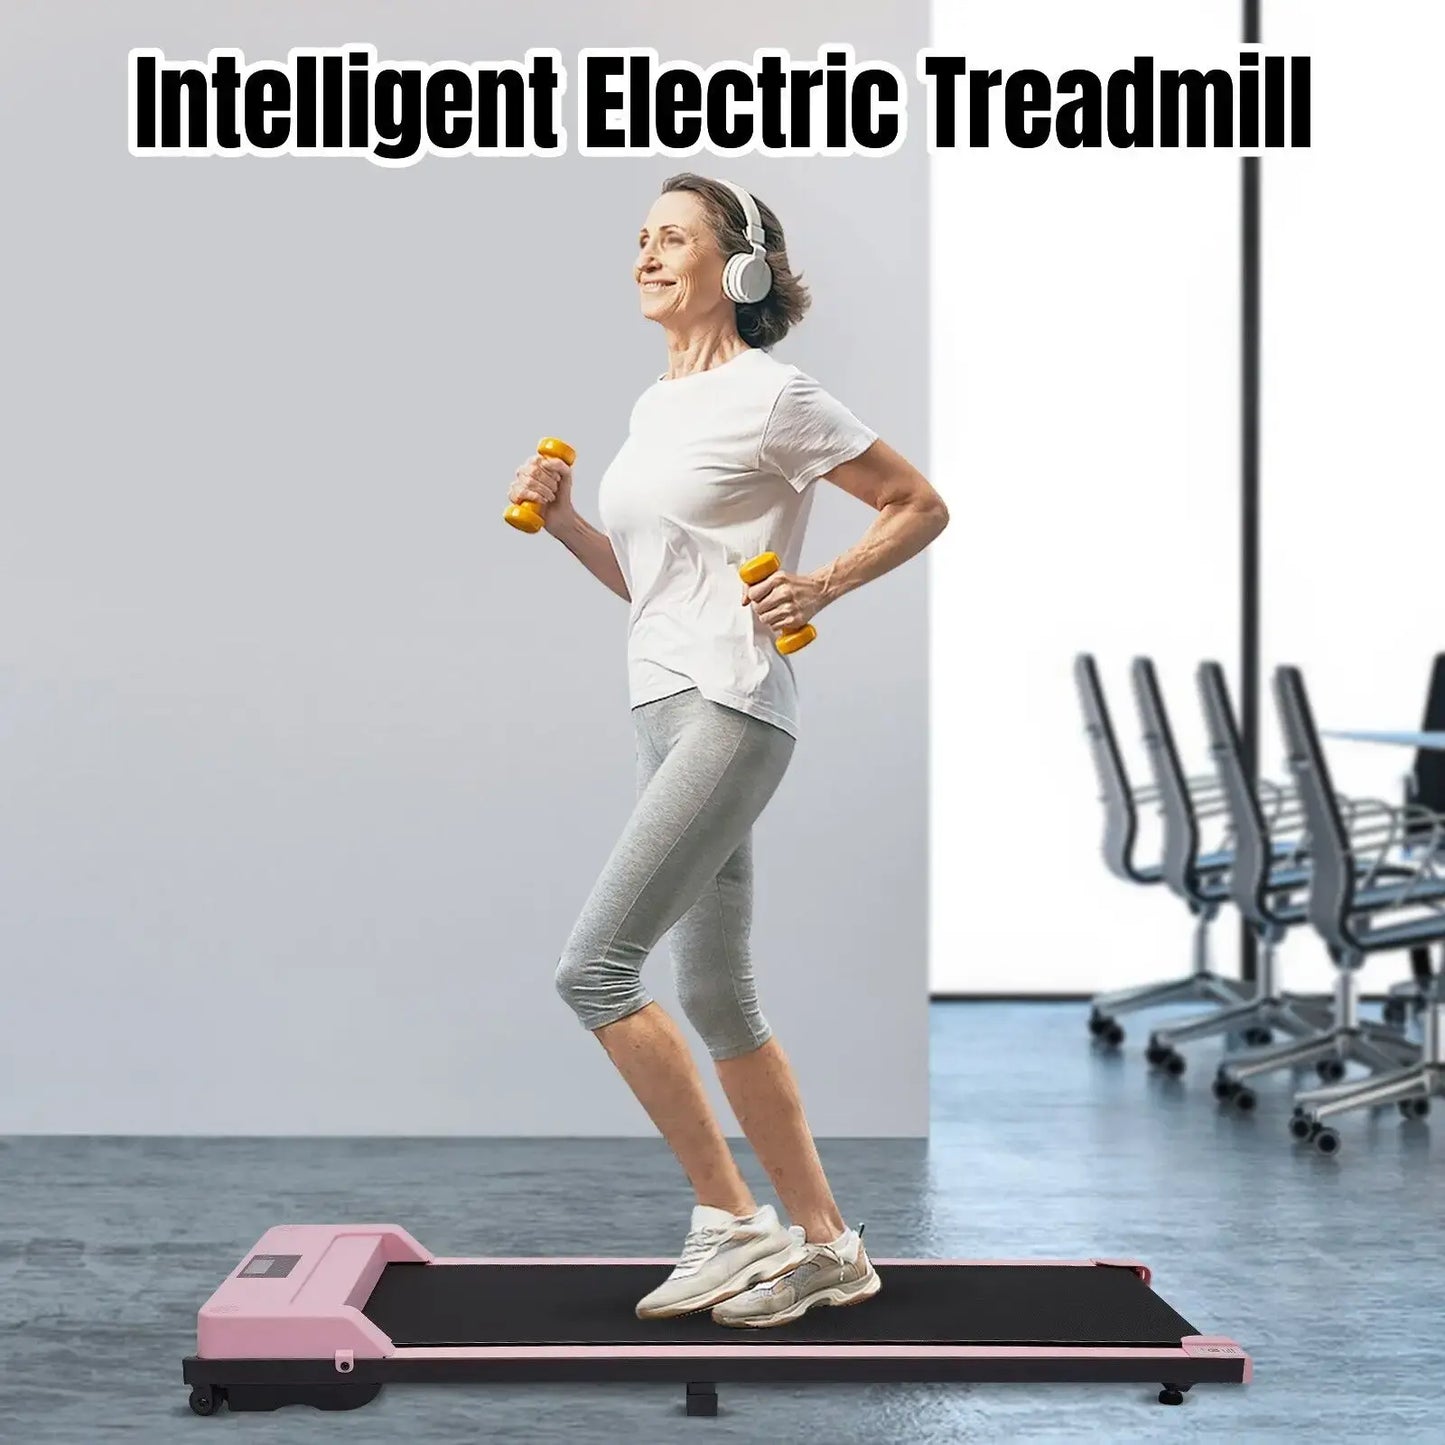 Treadmill for Exercise Equipment, Electric Walking and Running Machine, Sport Gym Equipment, Under Desk, Home for Weight Loss